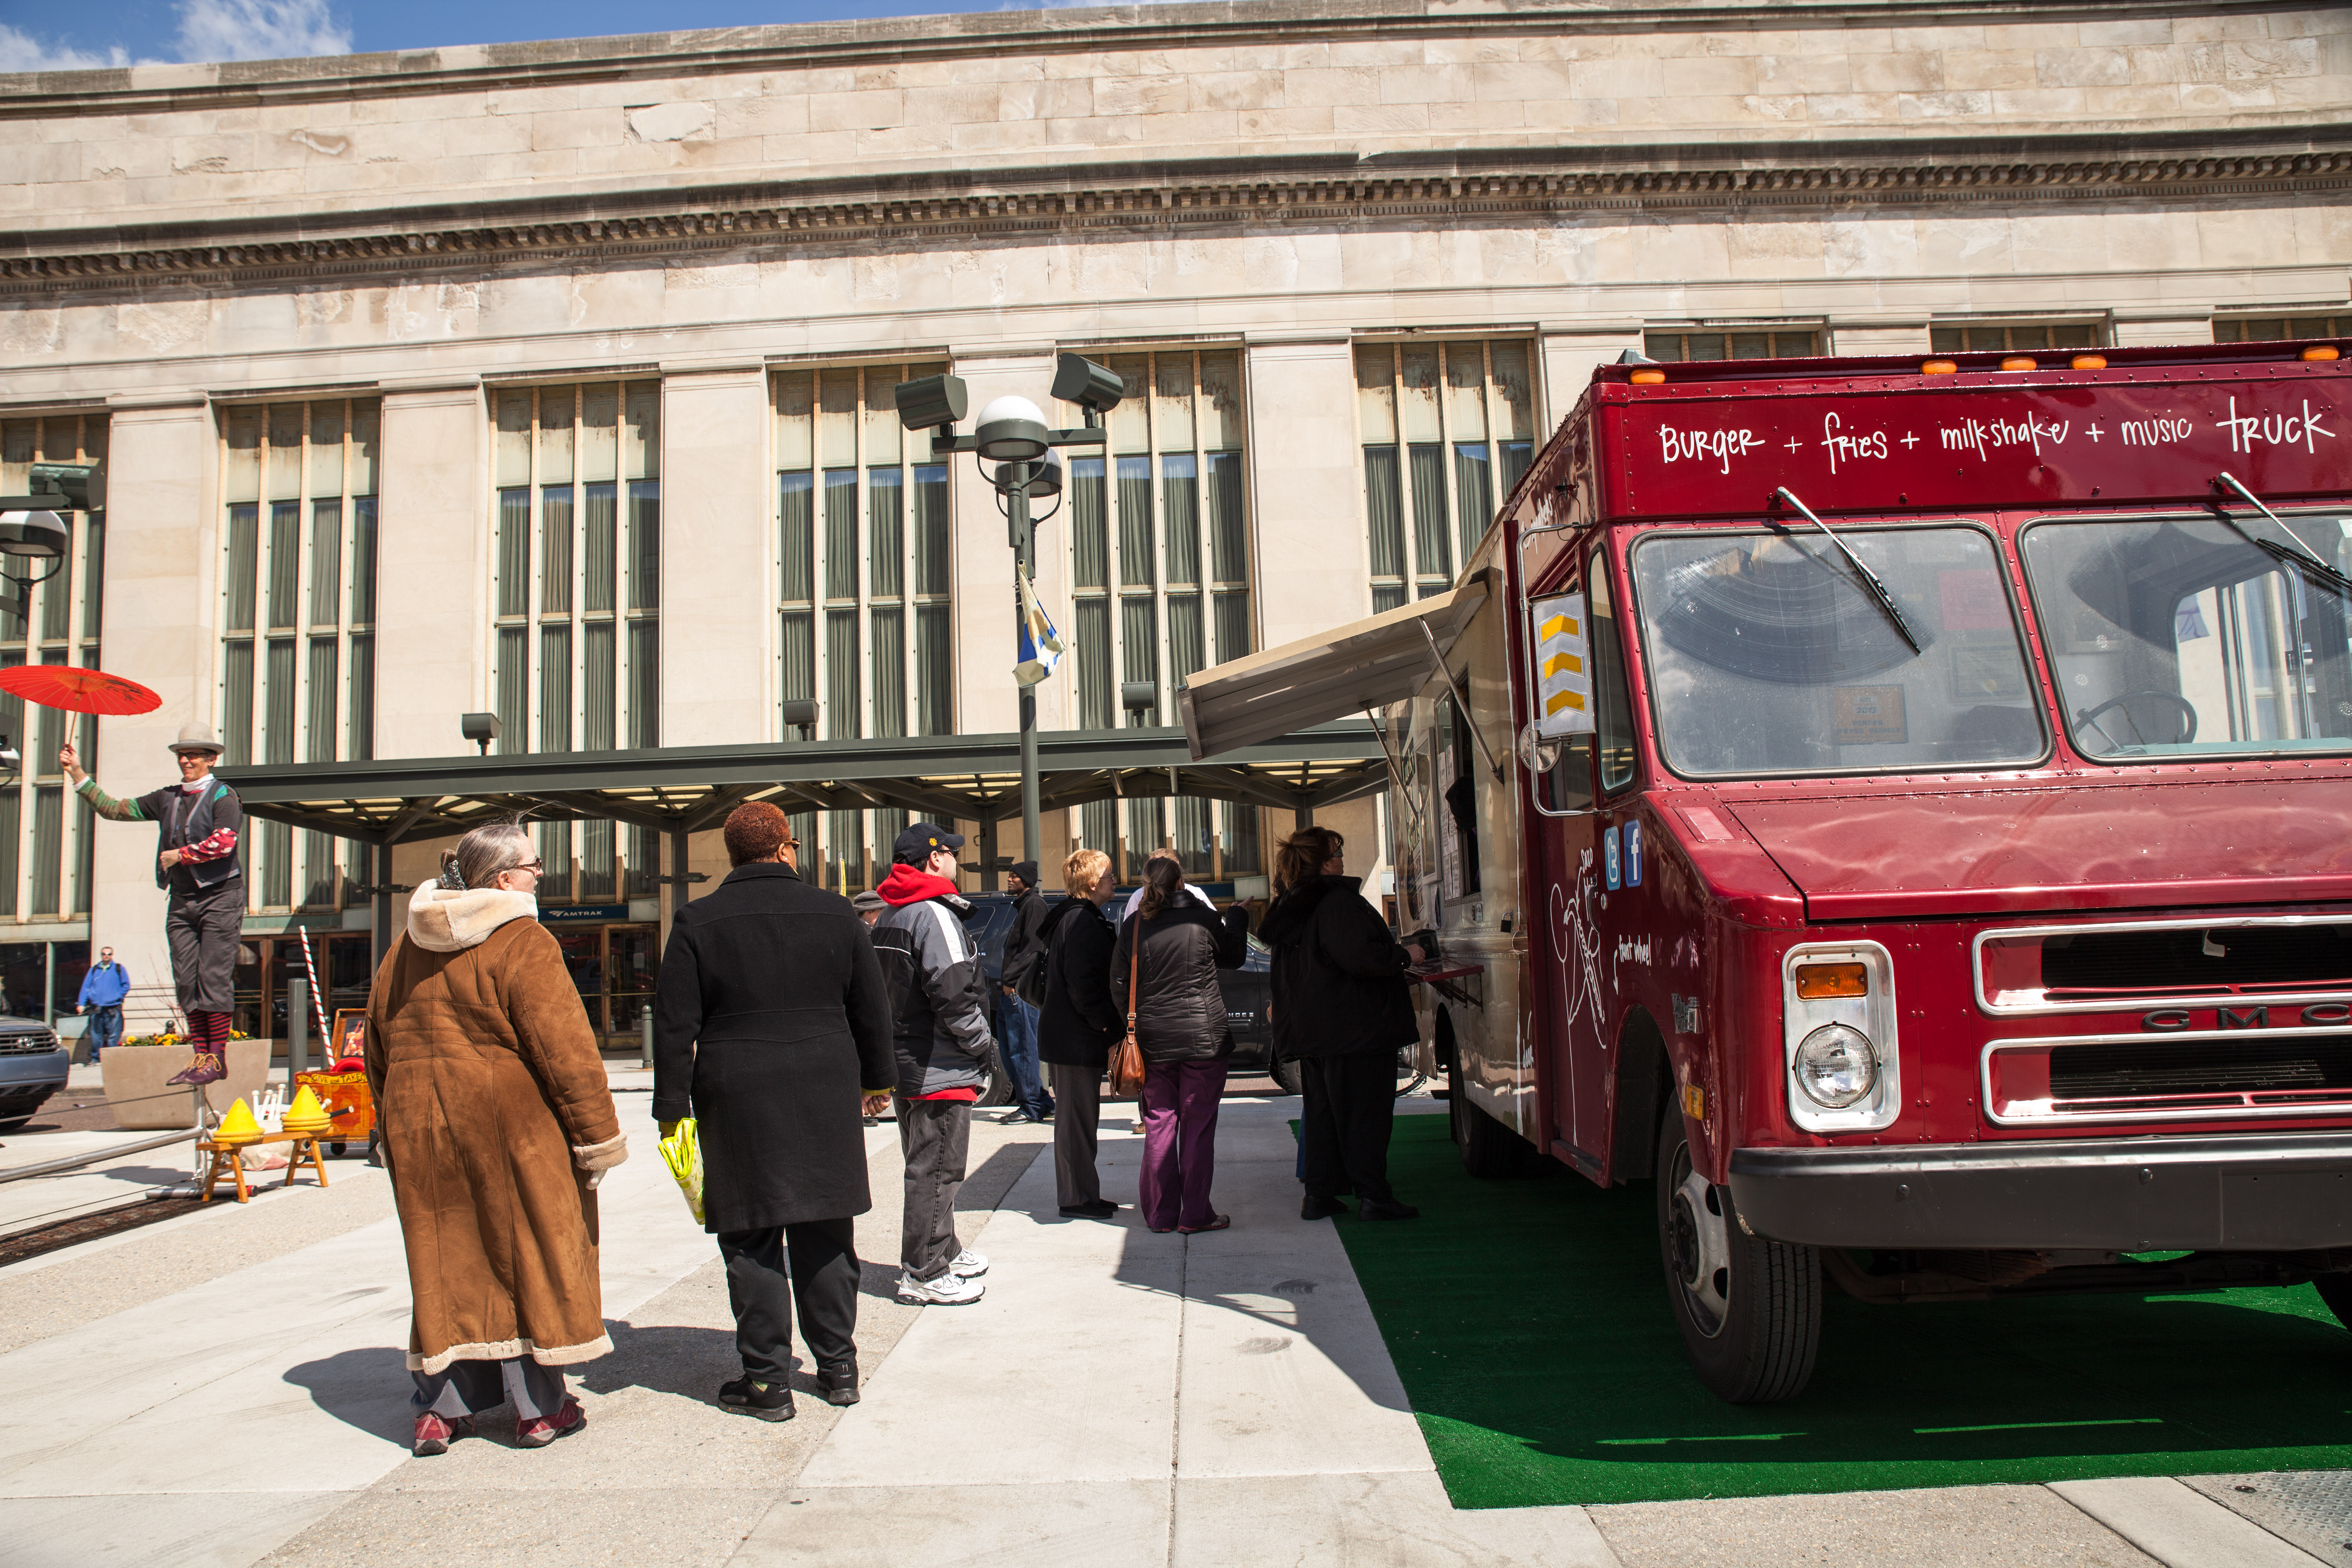 Guests enjoying a food truck in 2013